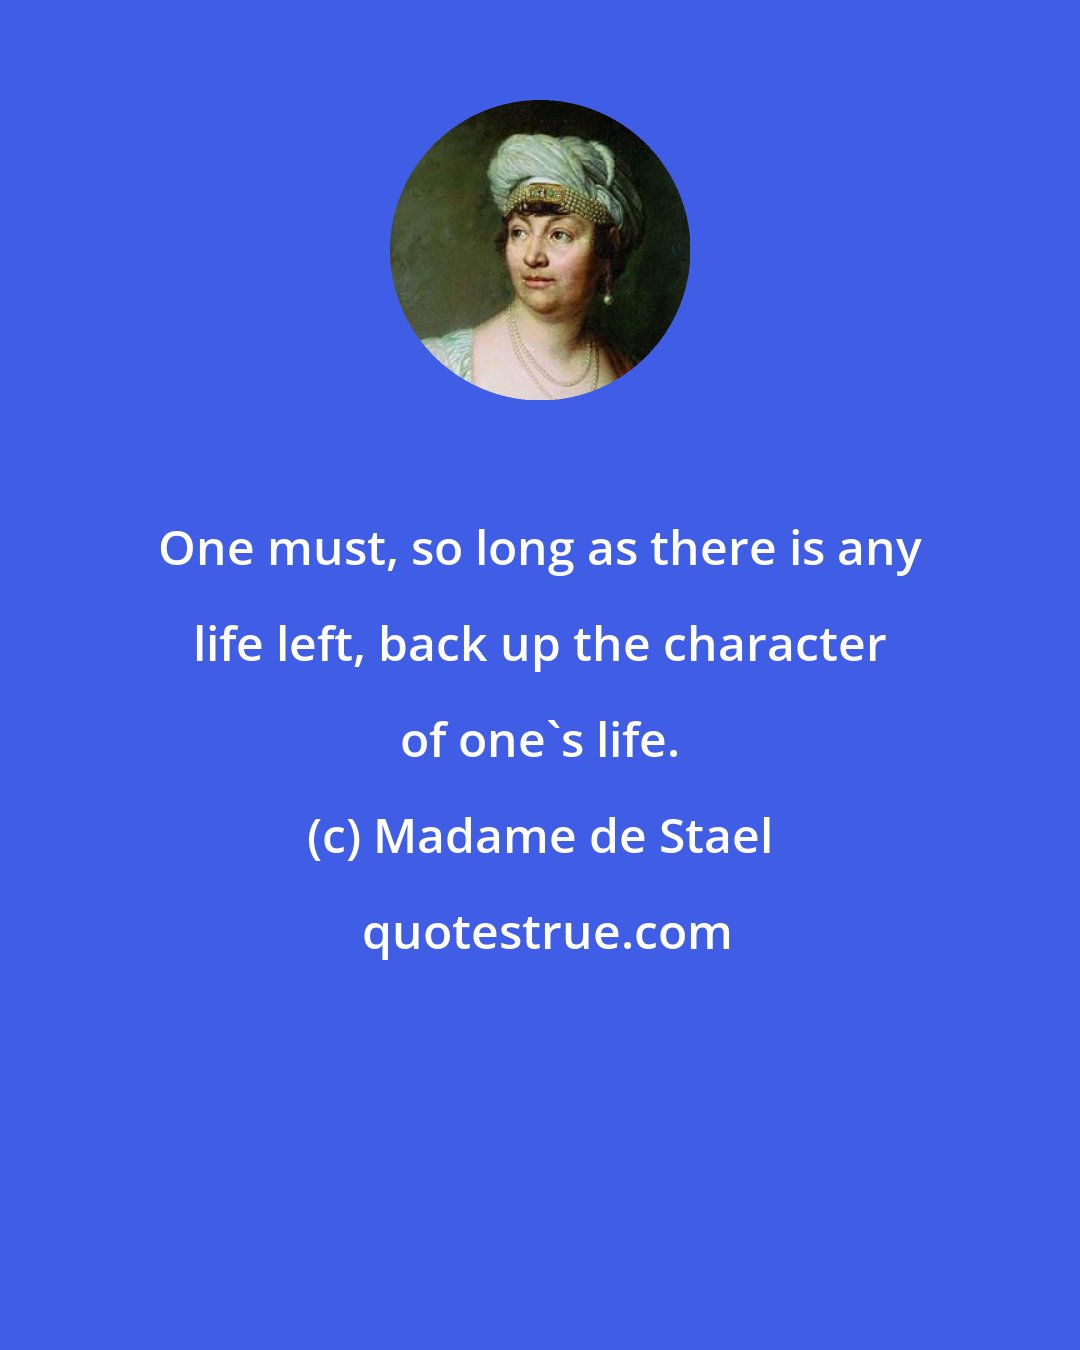 Madame de Stael: One must, so long as there is any life left, back up the character of one's life.